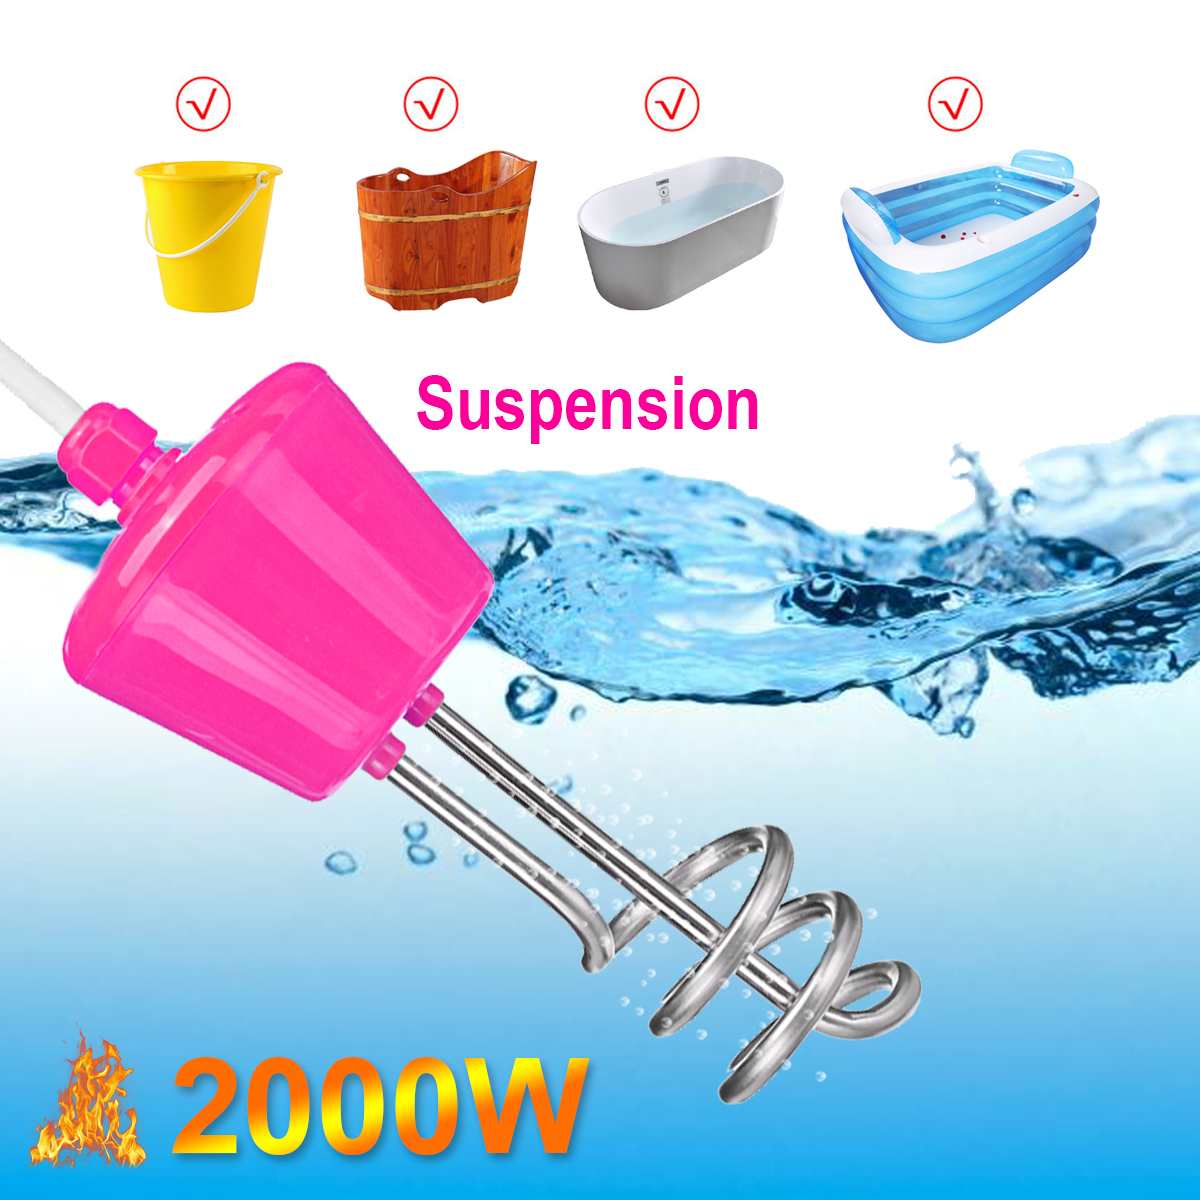 2000W Portable Suspension Electric Water Heater Element Boiler for Inflatable Pool Tub Travel Camping Water Heating Element